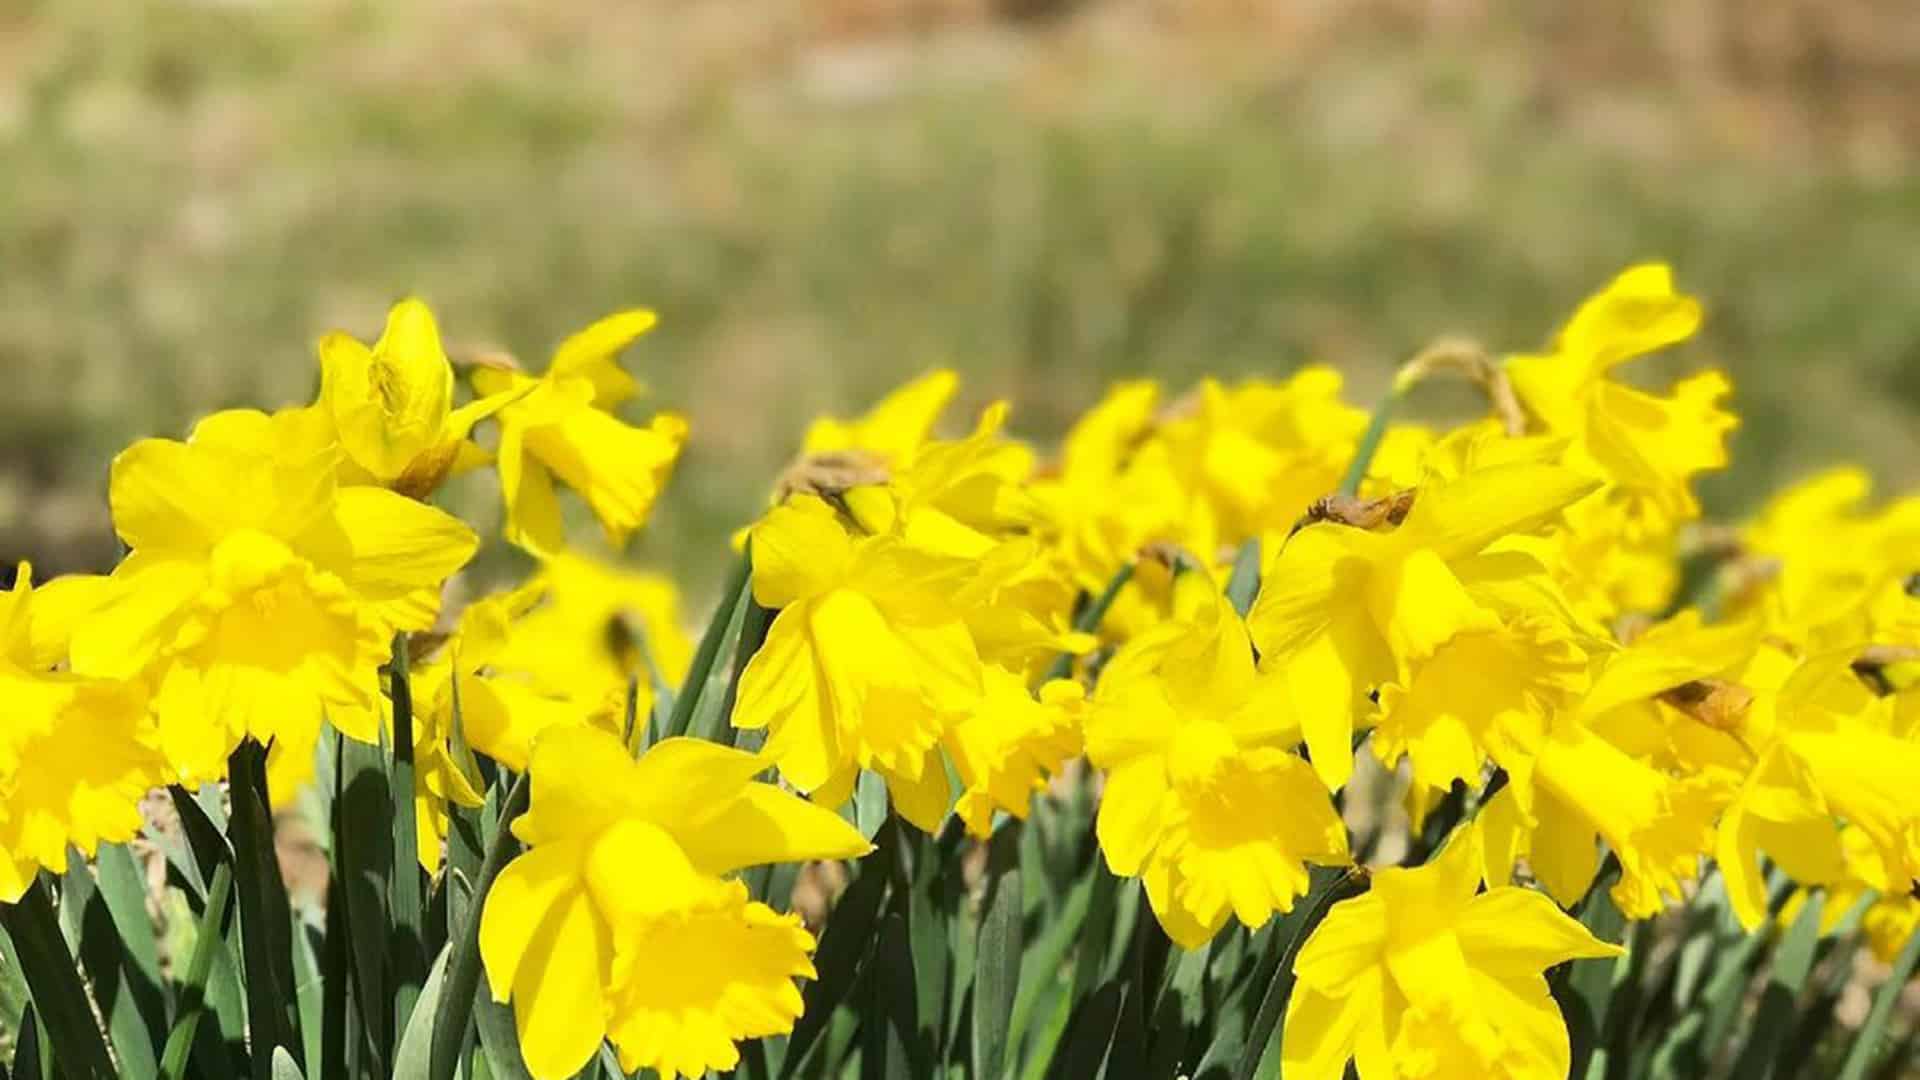 A field with yellow daffodils